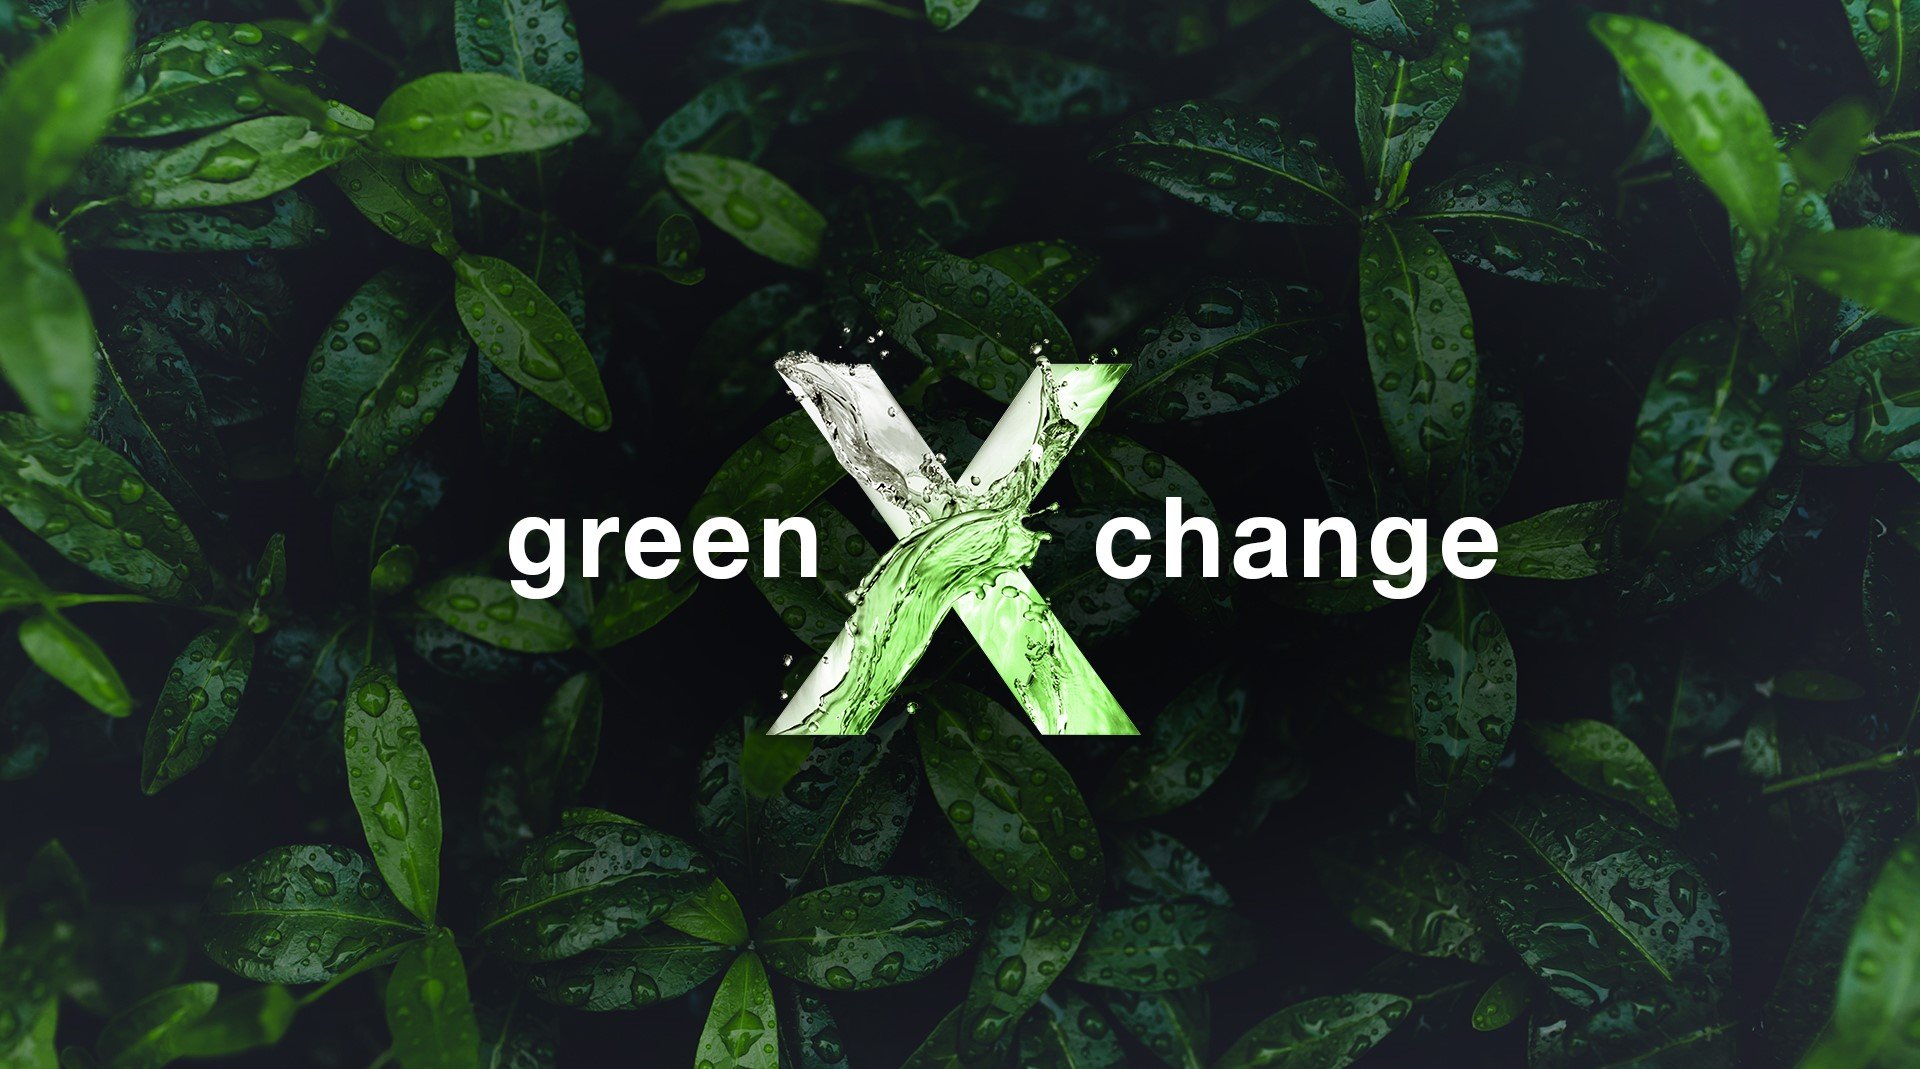 GreenXchange event logo in green leaves background